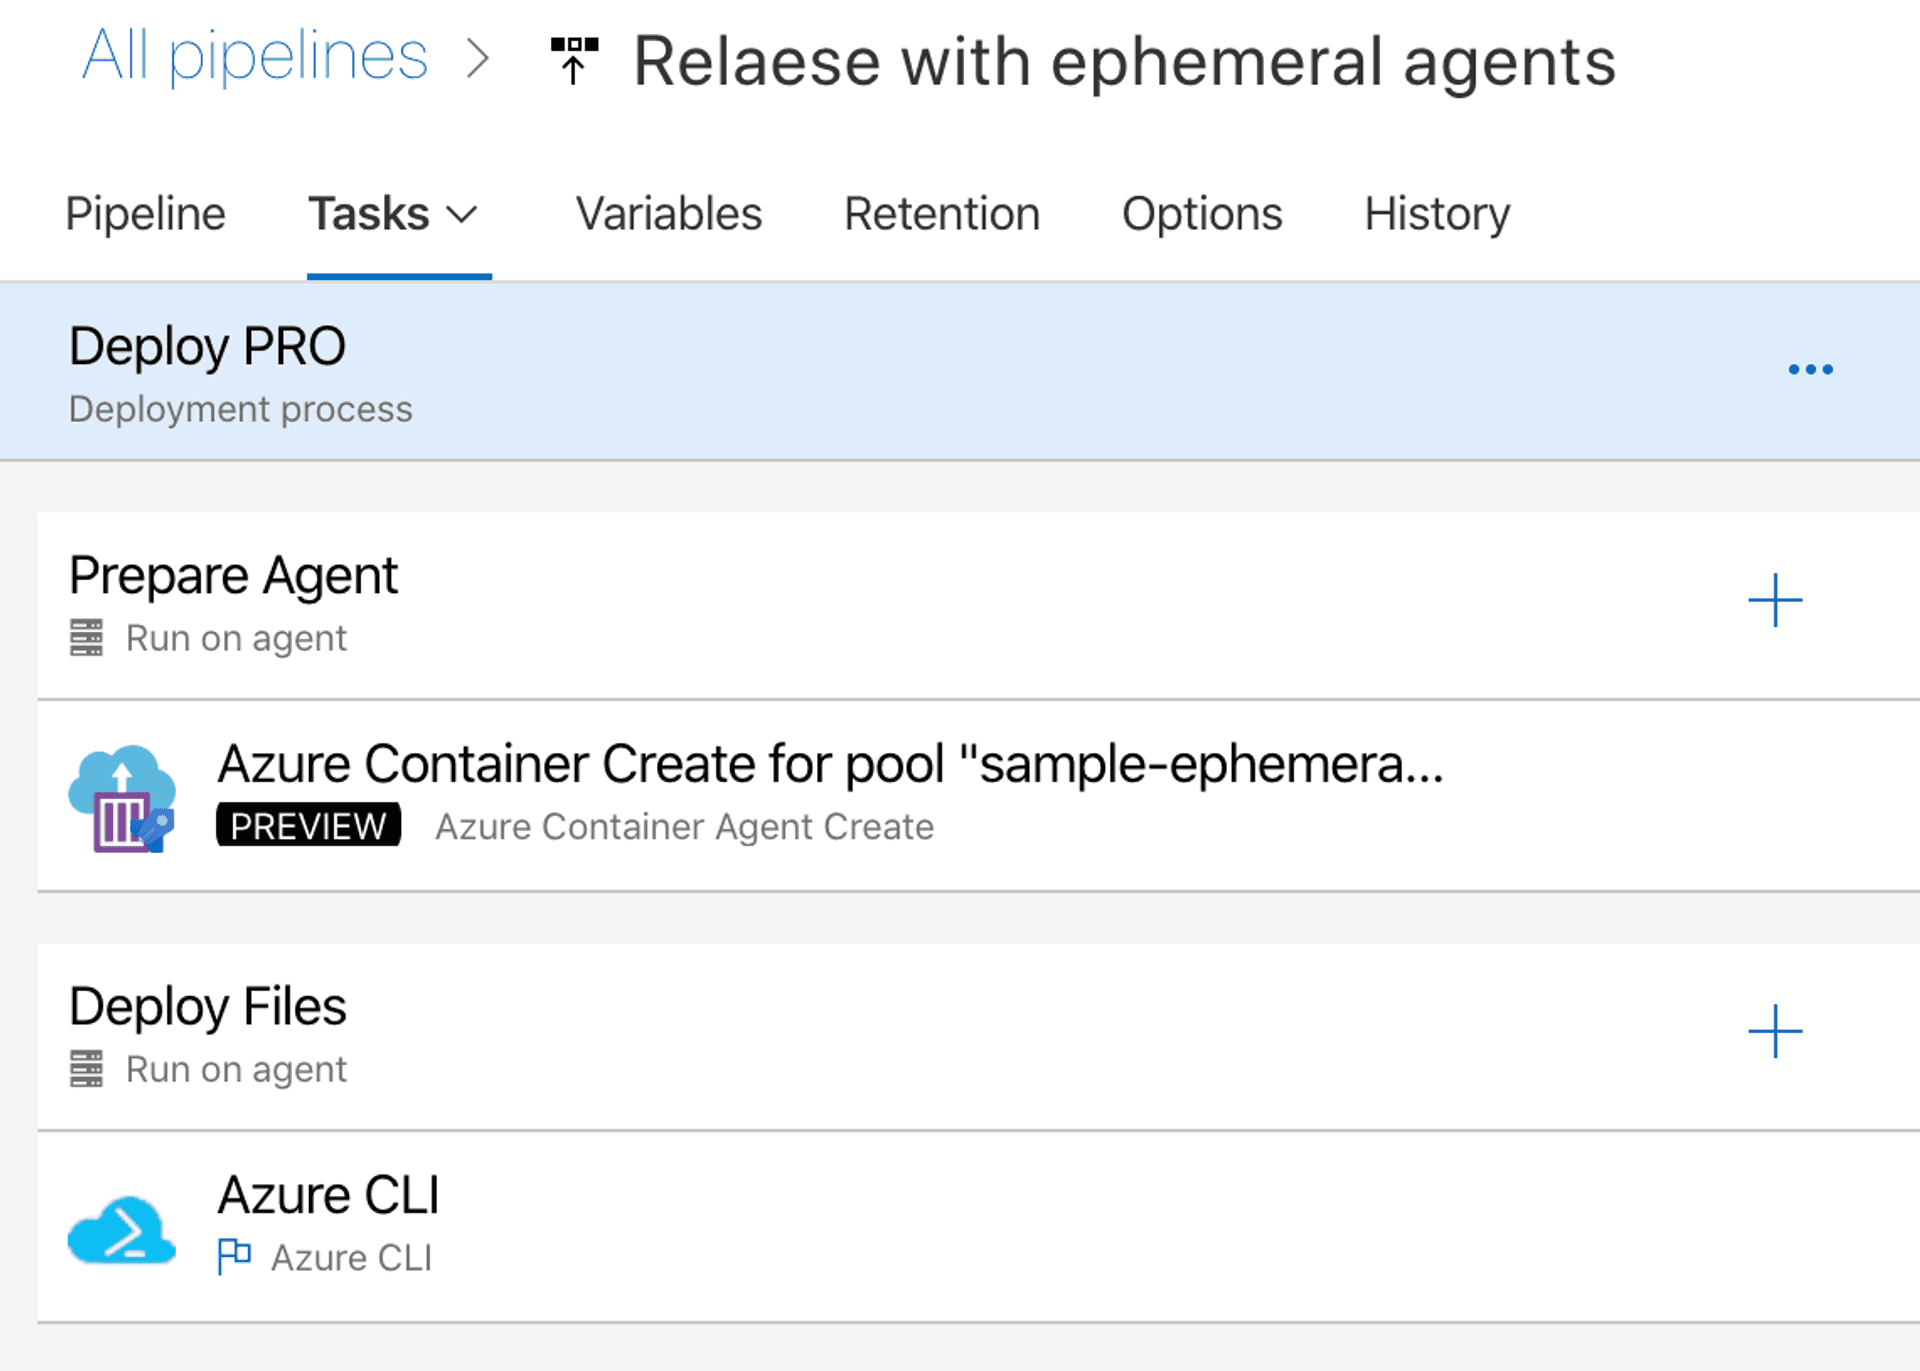 Example pipeline with ephemeral agents